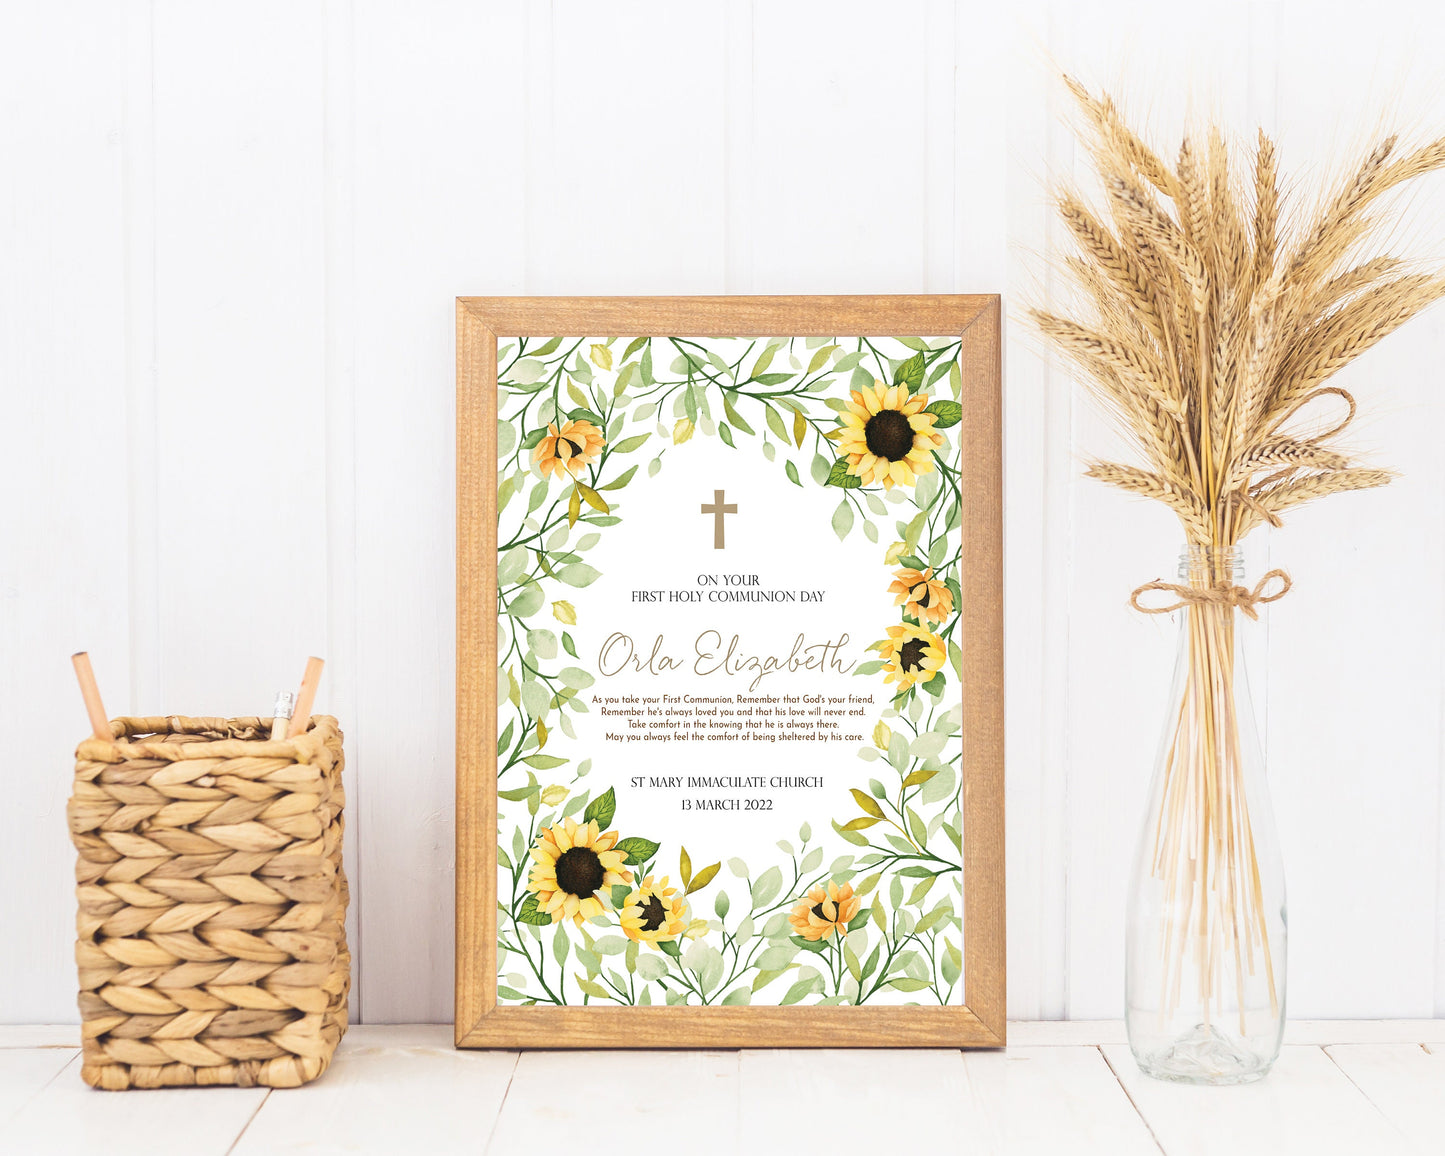 First Holy Communion Sunflowers Print, Personalised First Holy Communion Gift,  1st Holy Communion Keepsake Gift, Floral Communion Print